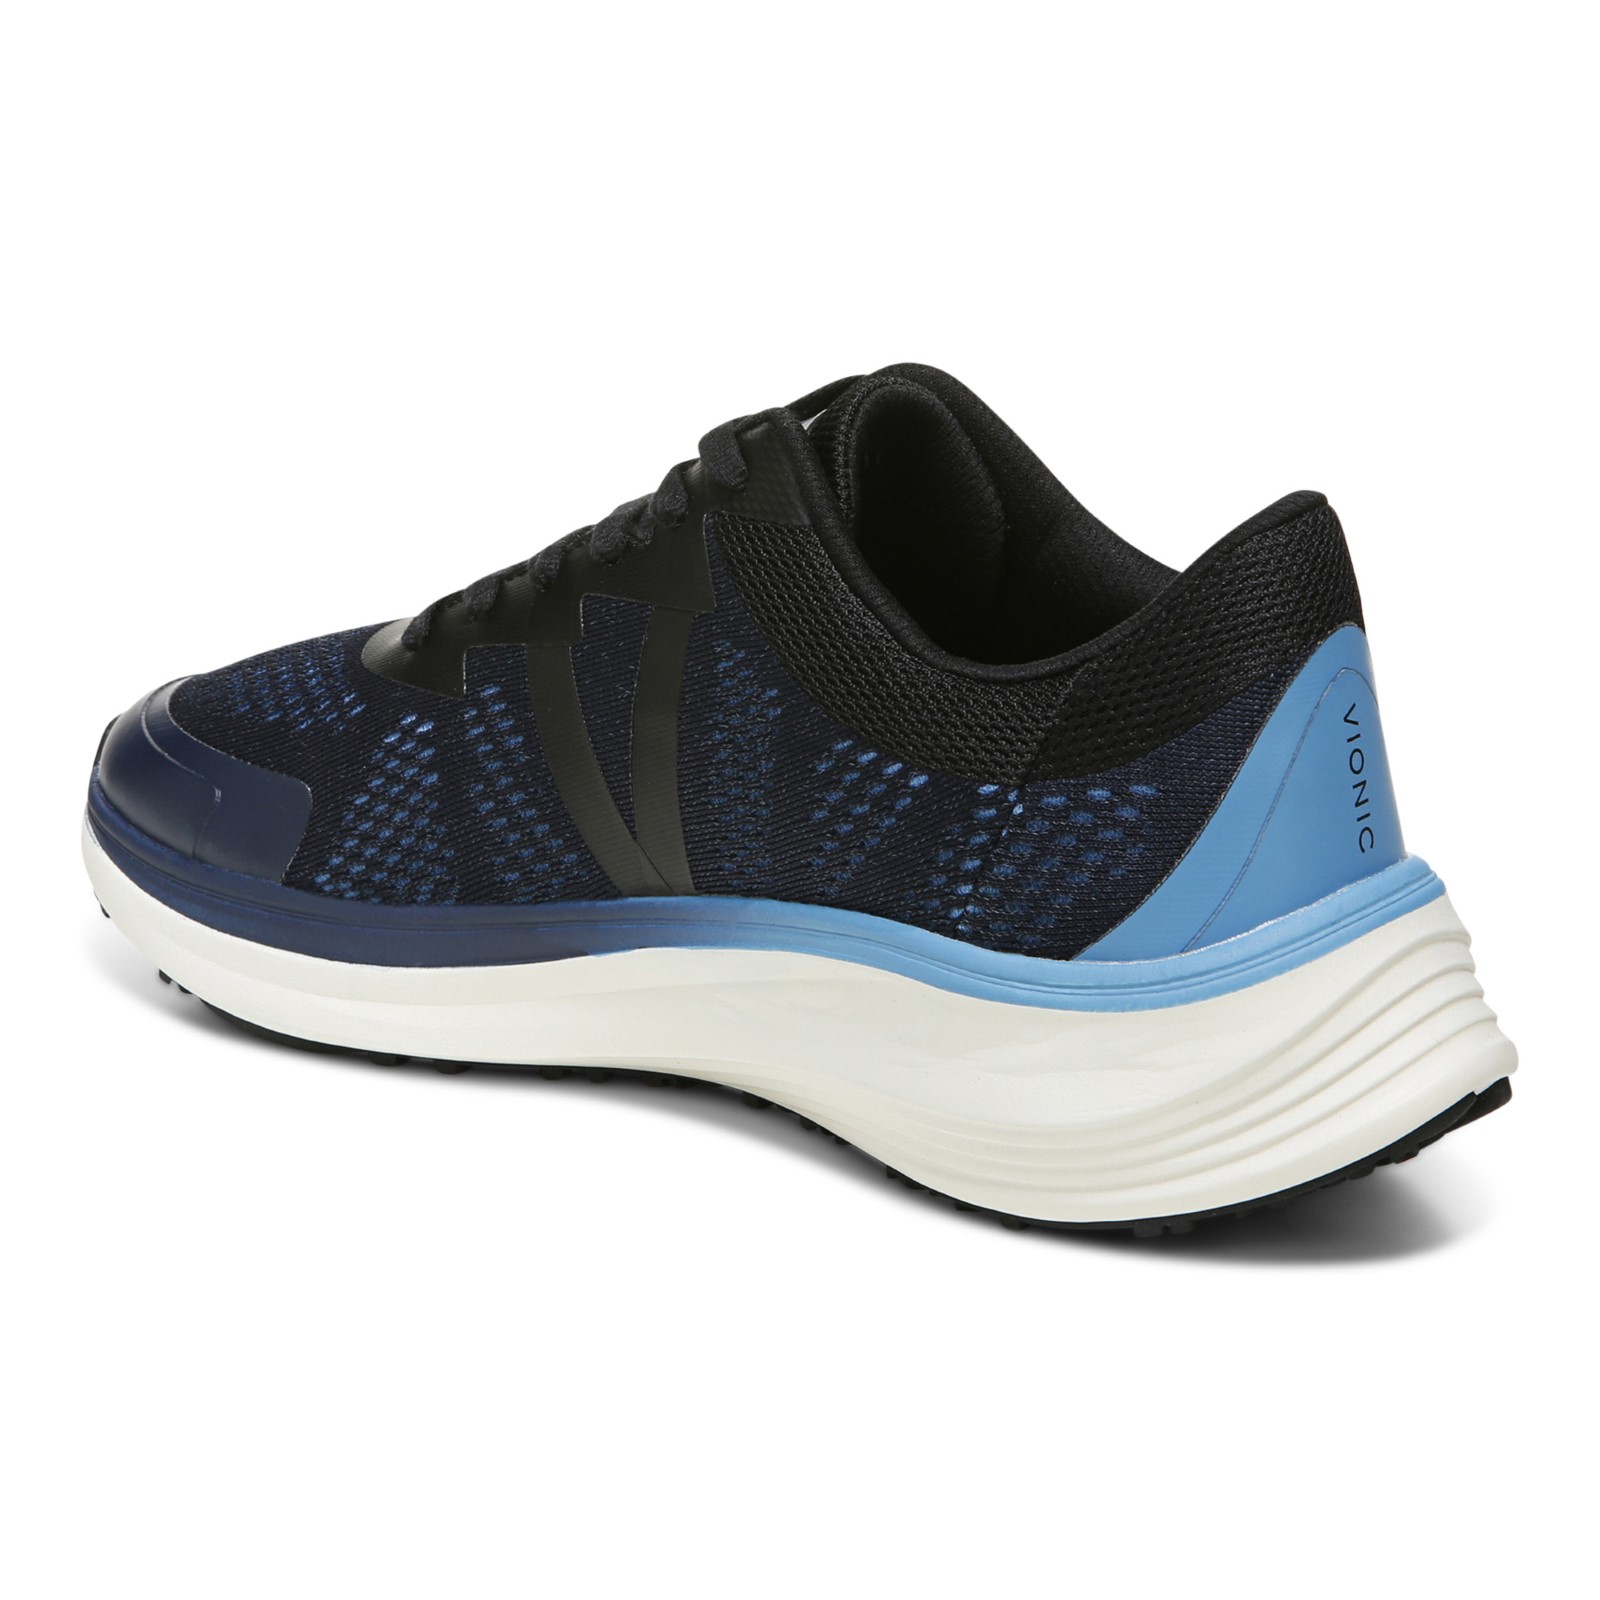 Vionic Limitless Unisex Arch Supportive Walking Shoe - Free Shipping